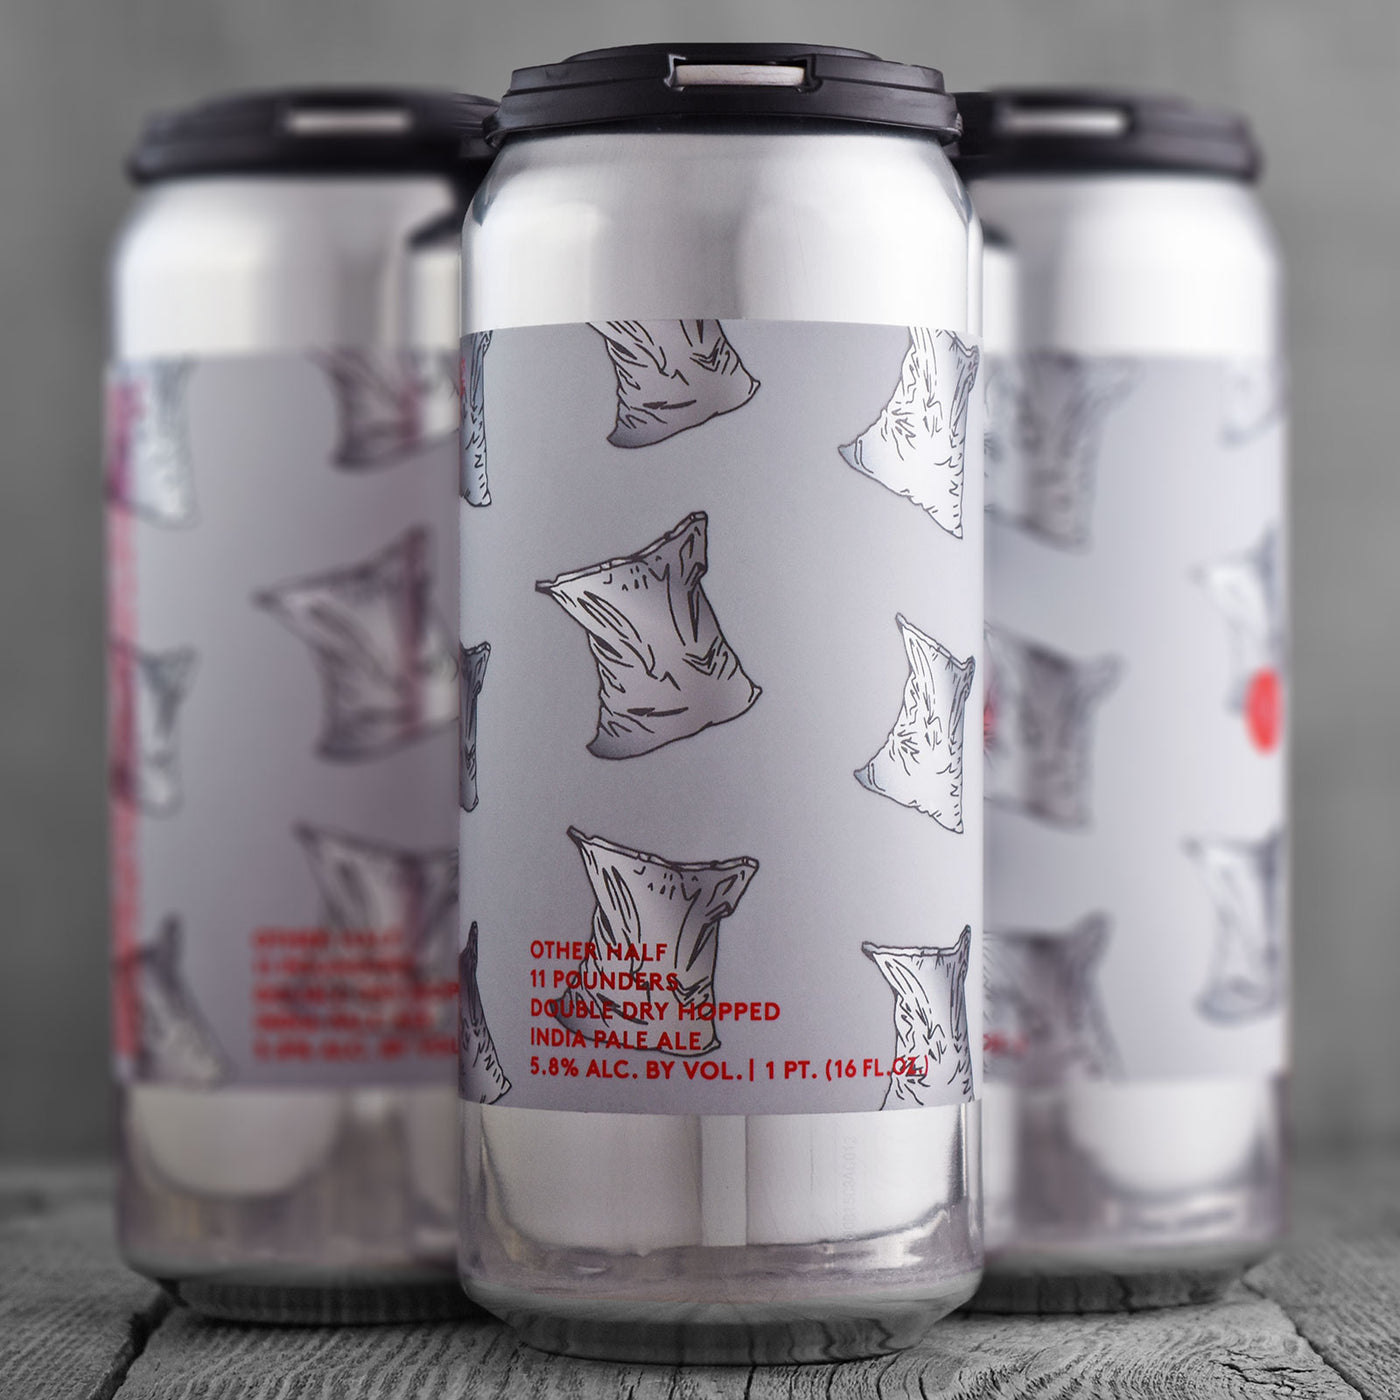 Other Half DDH 11 Pounders - Limit 2